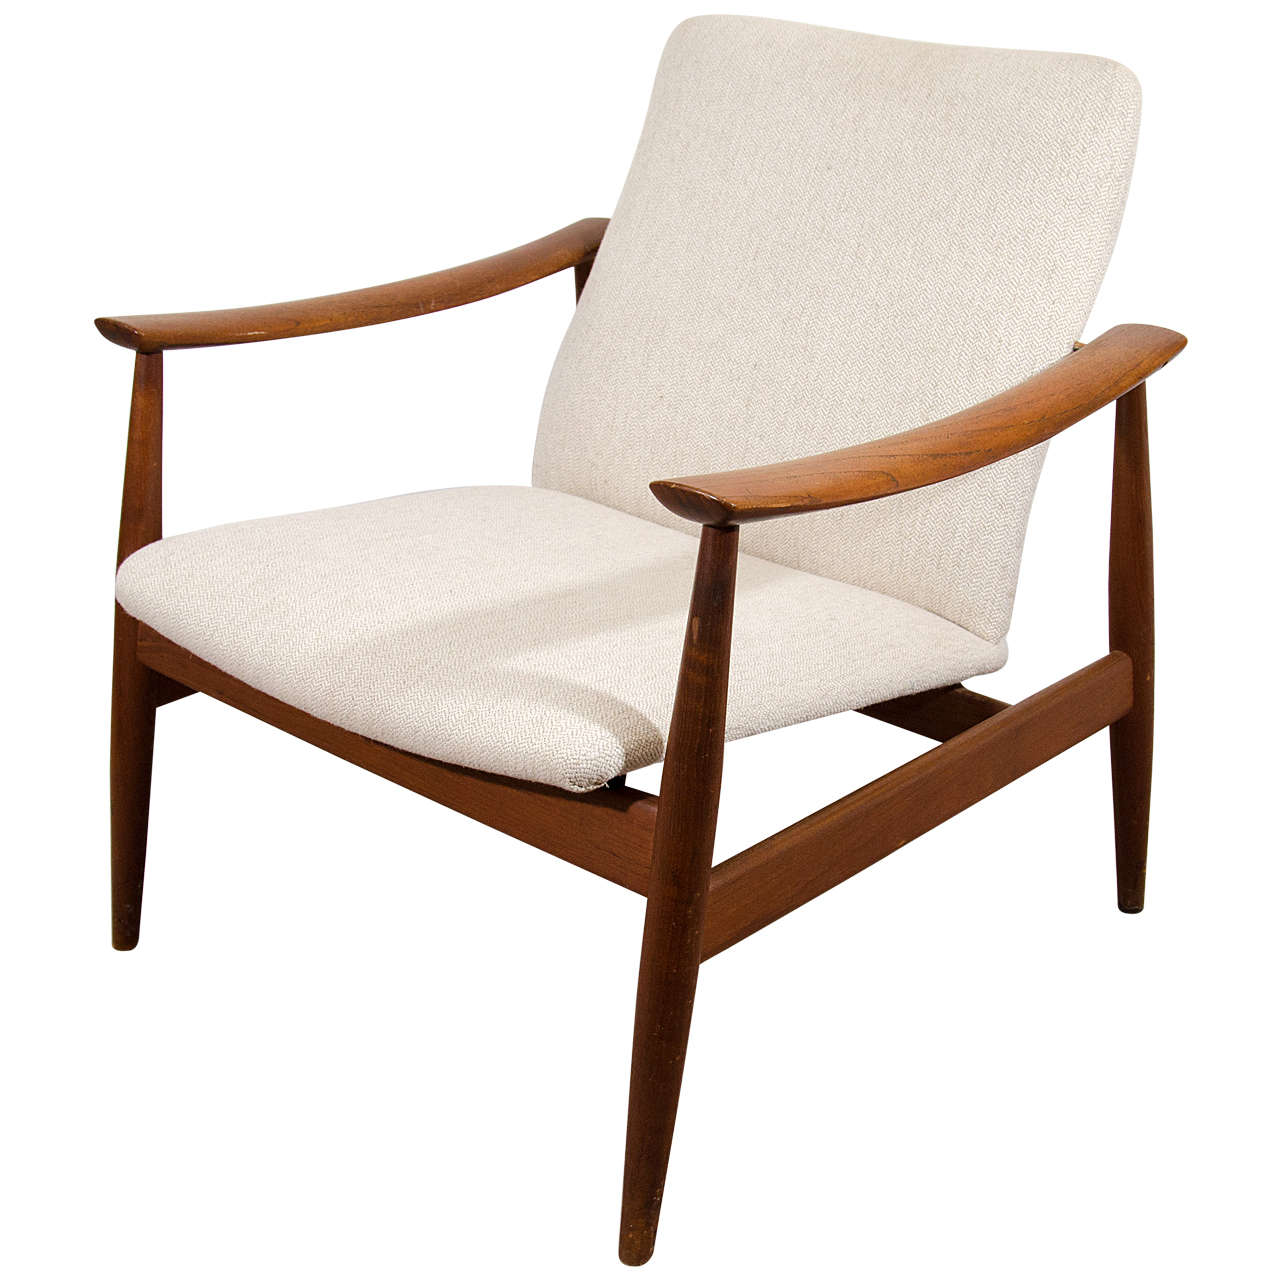 Midcentury Lounge Chair by Finn Juhl for France & Sons